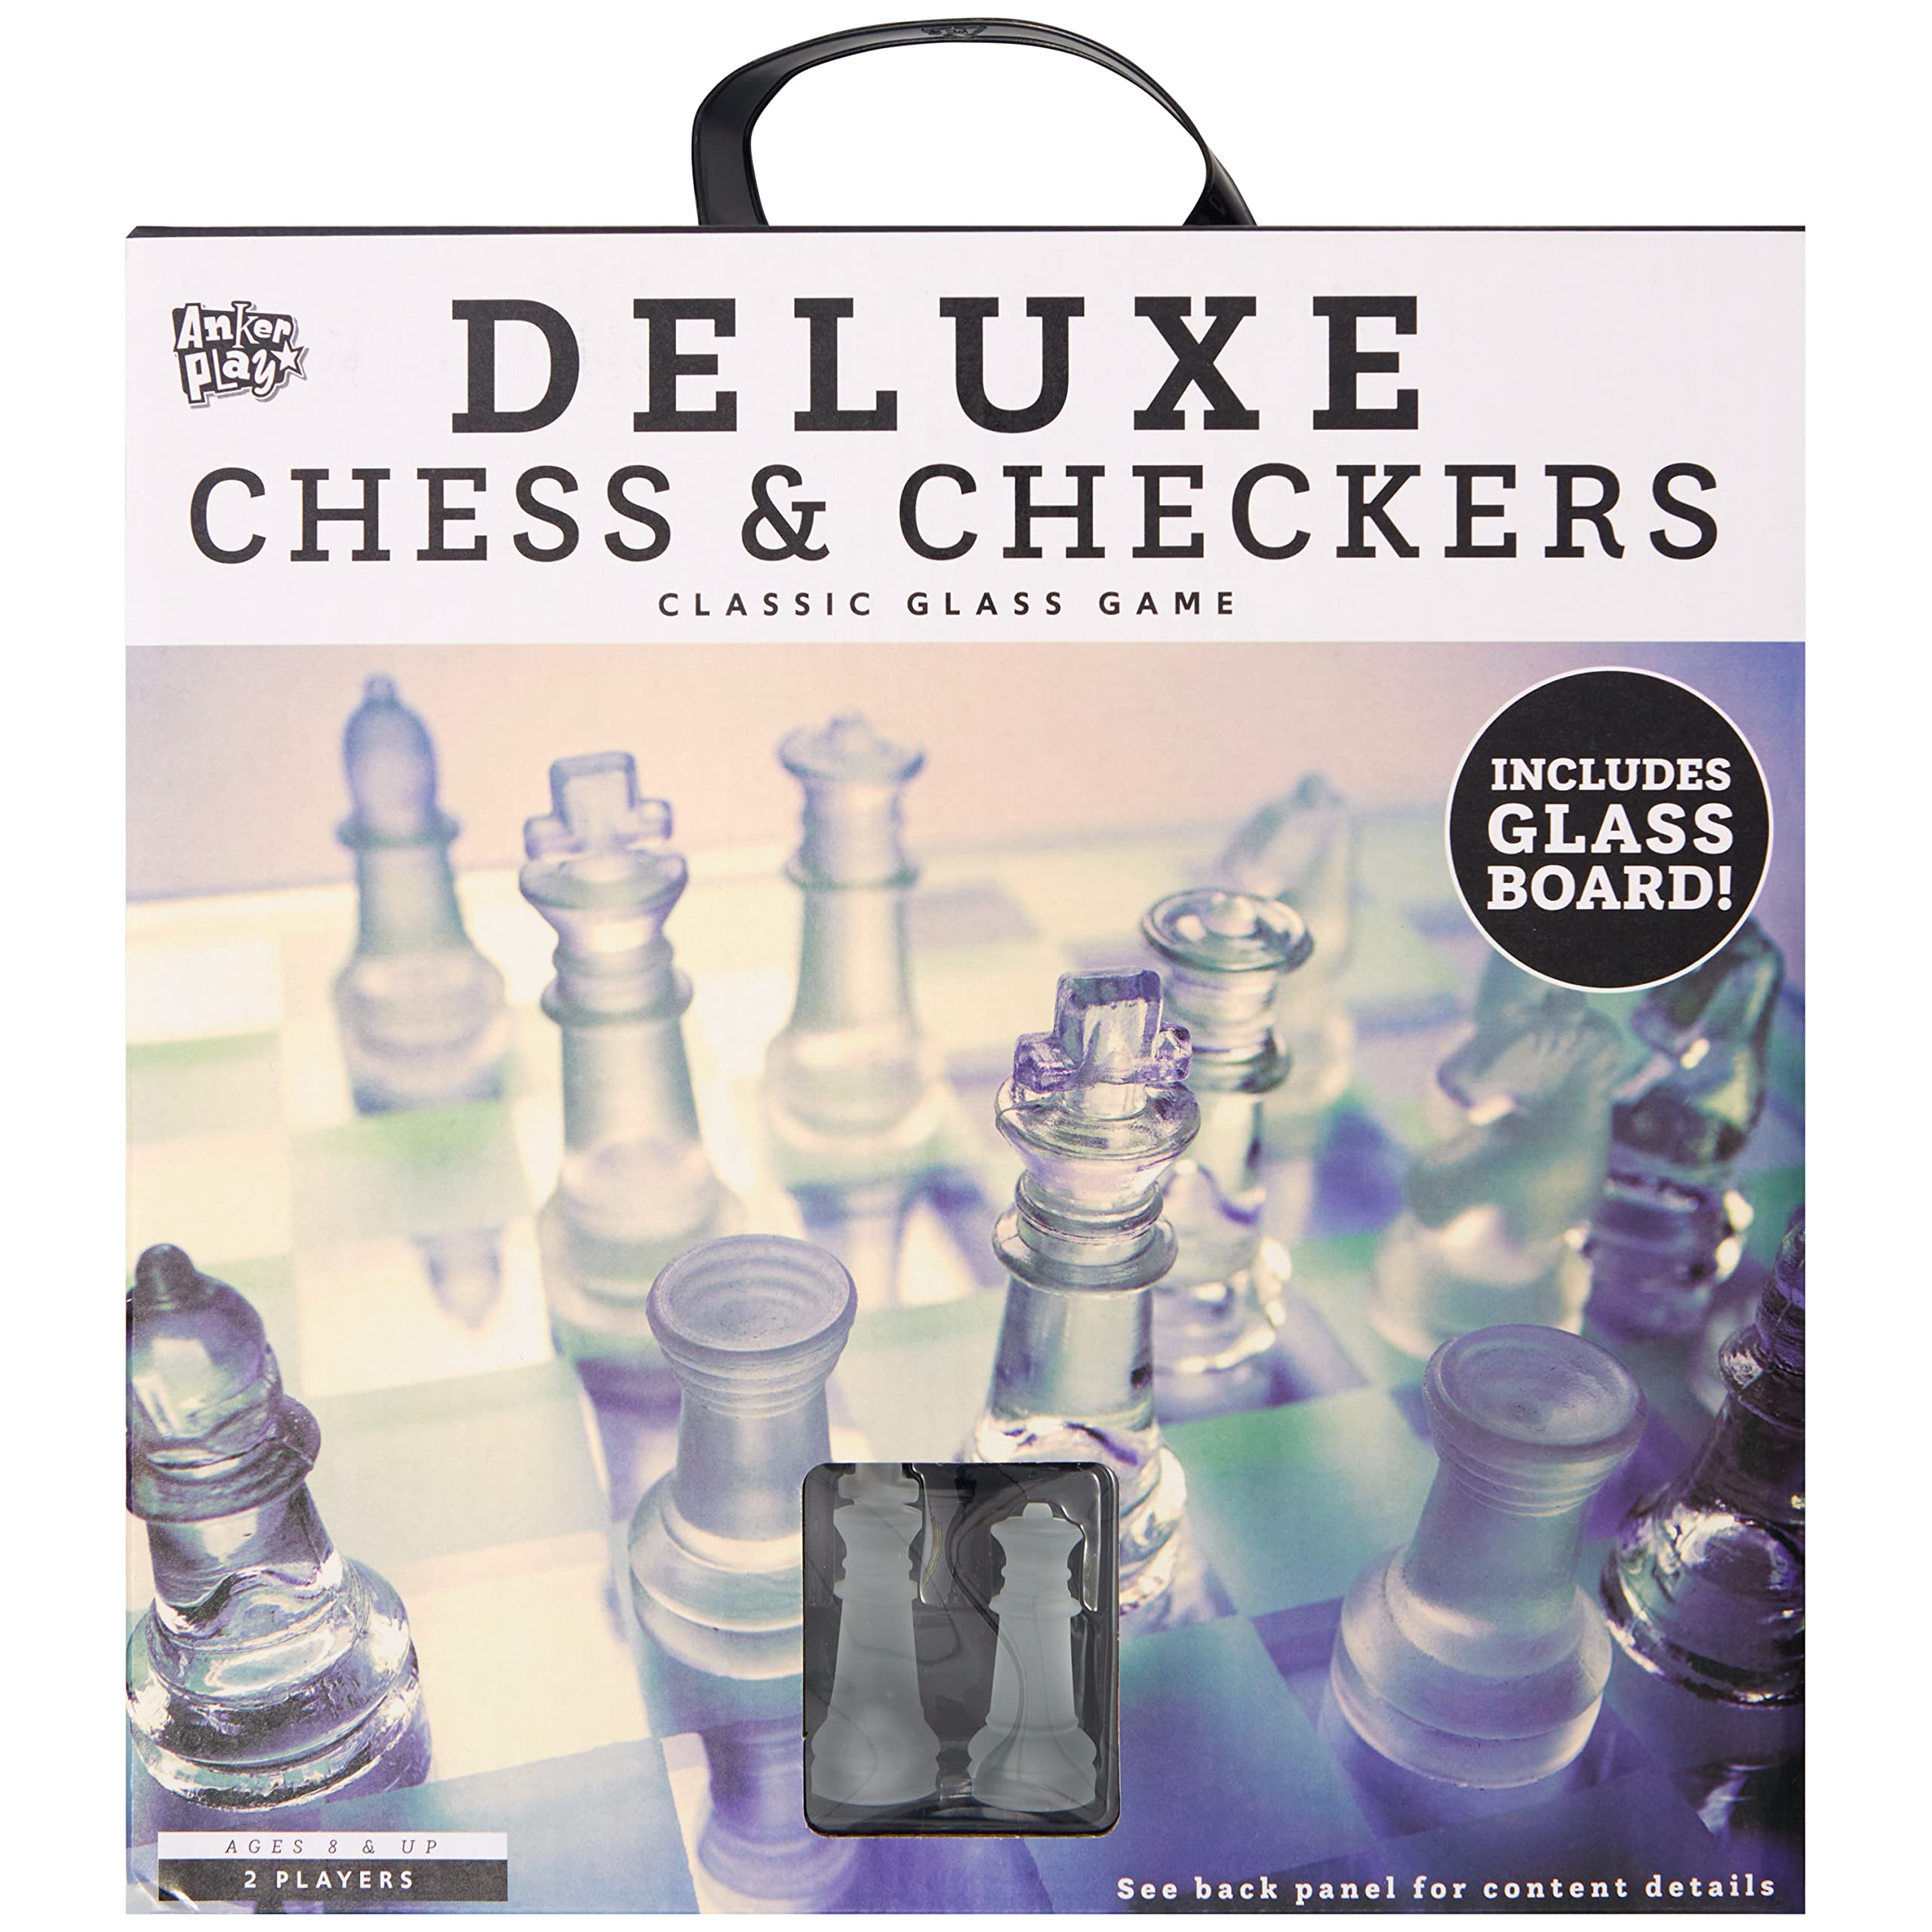 Glass Chess and Checkers Set - Premium Glass Game Kit - Includes 1 Glass Board with 32 Clear and Frosted Checkers Pieces & 32 Clear and Frosted Chess Pieces - Great for Ages 6+